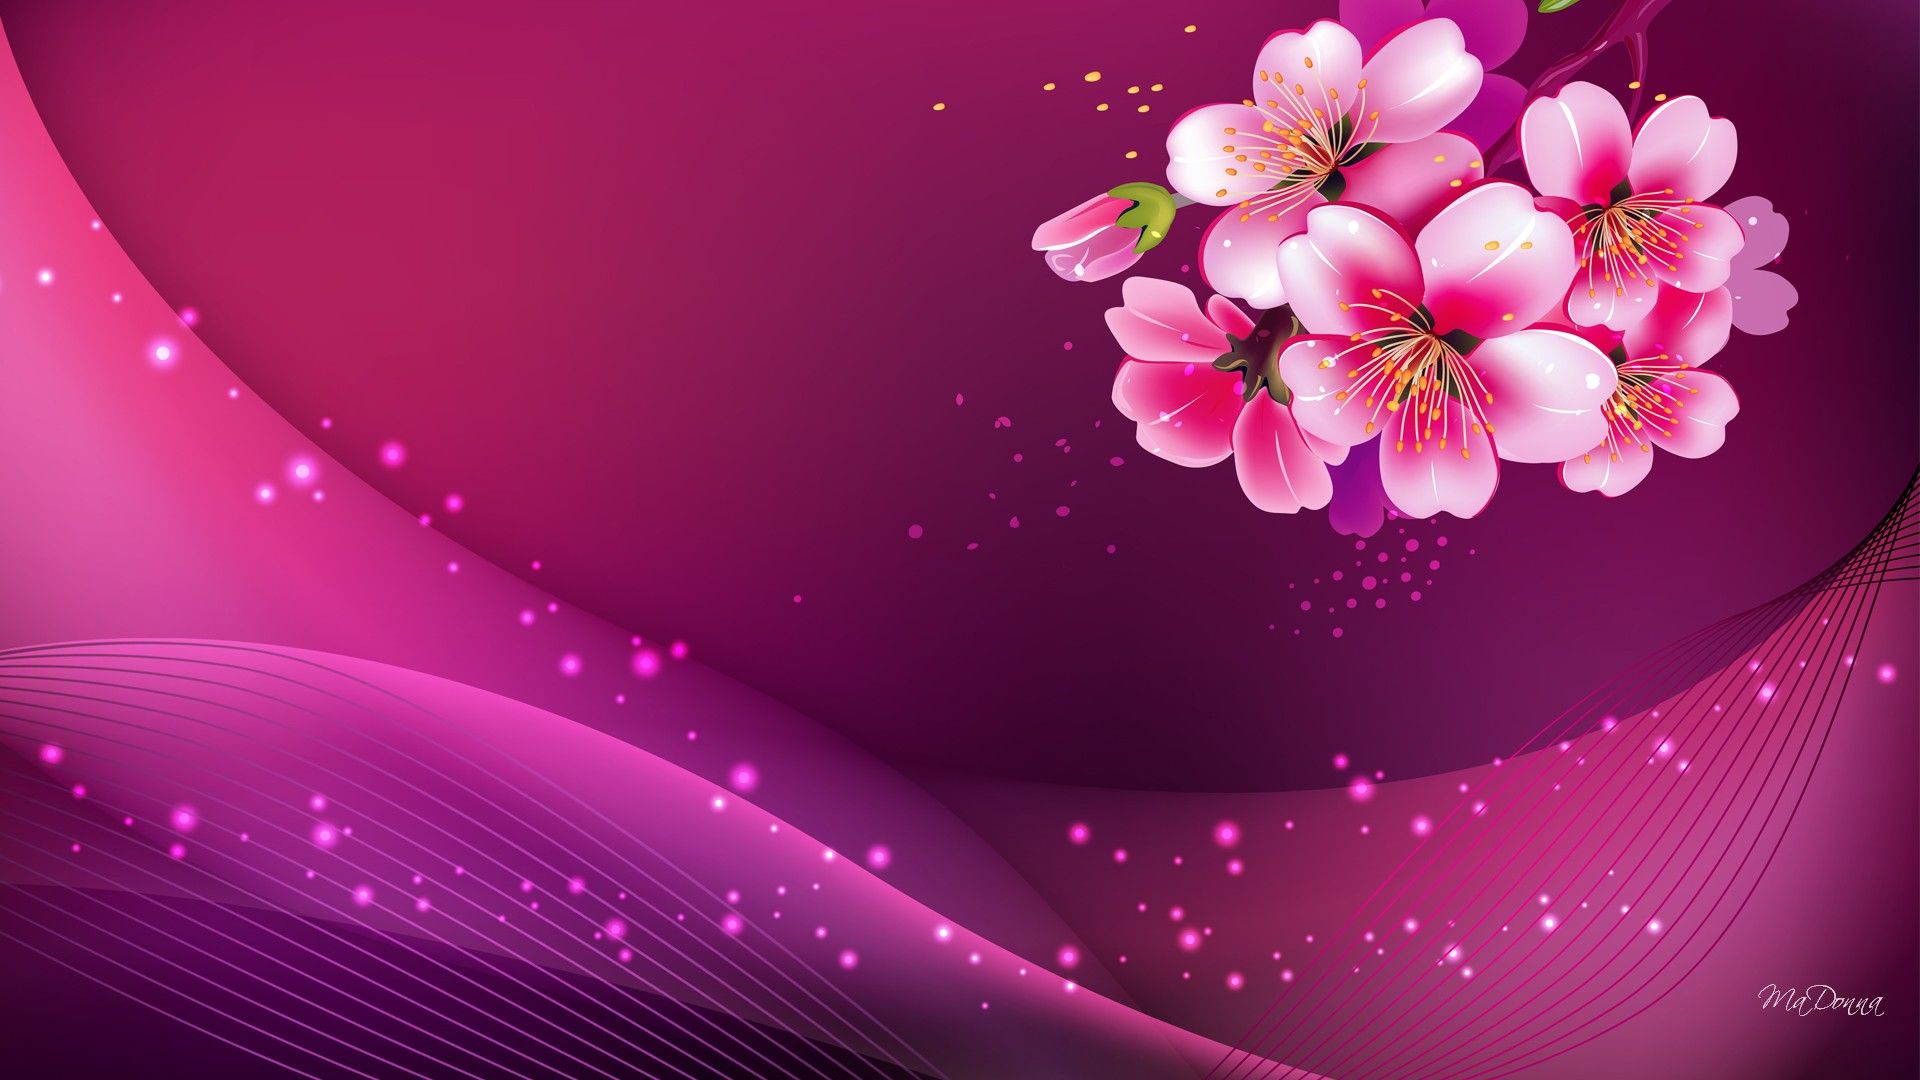 1920x1080px Pink Wallpapers free Download | #462161